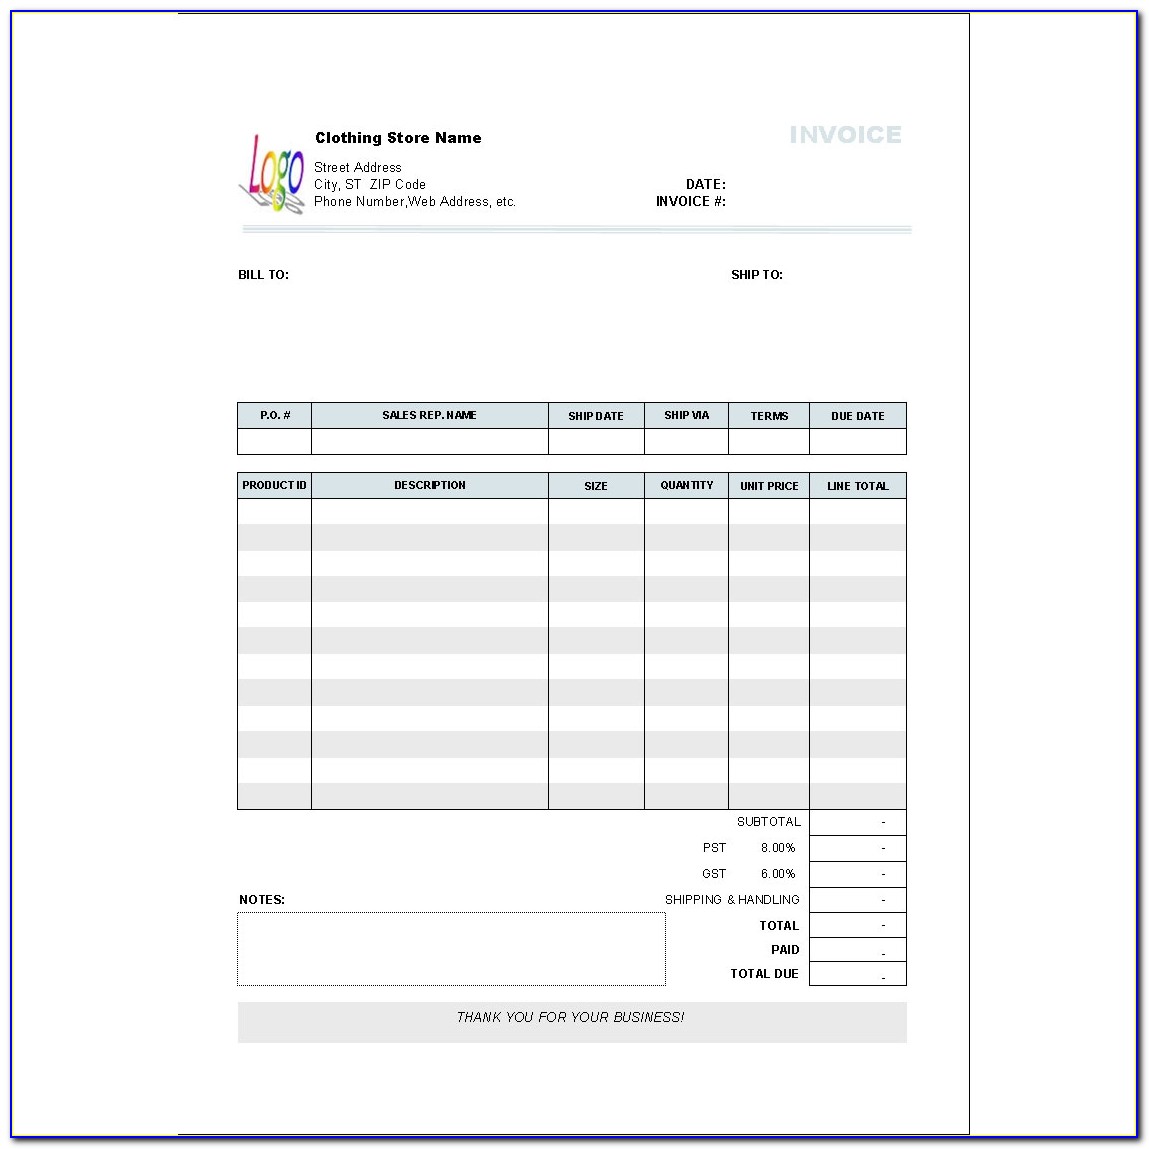 Business Invoice Sample Residers Windows Invoice Template